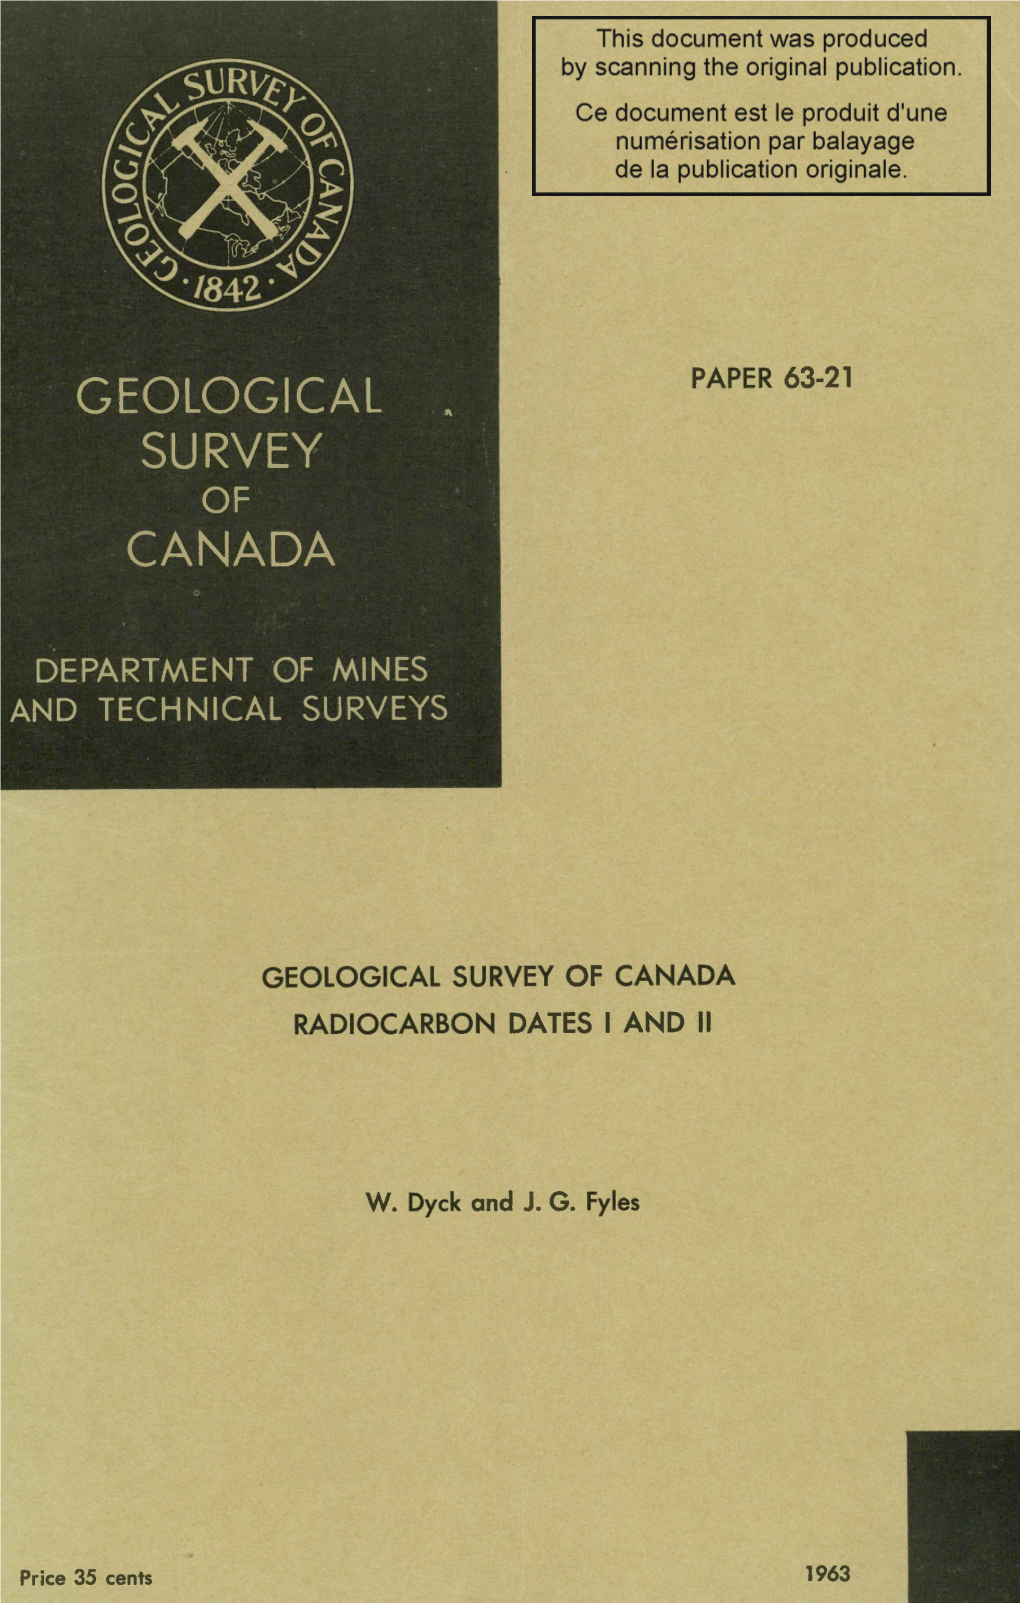 Paper 63-21 Geological Survey of Canada